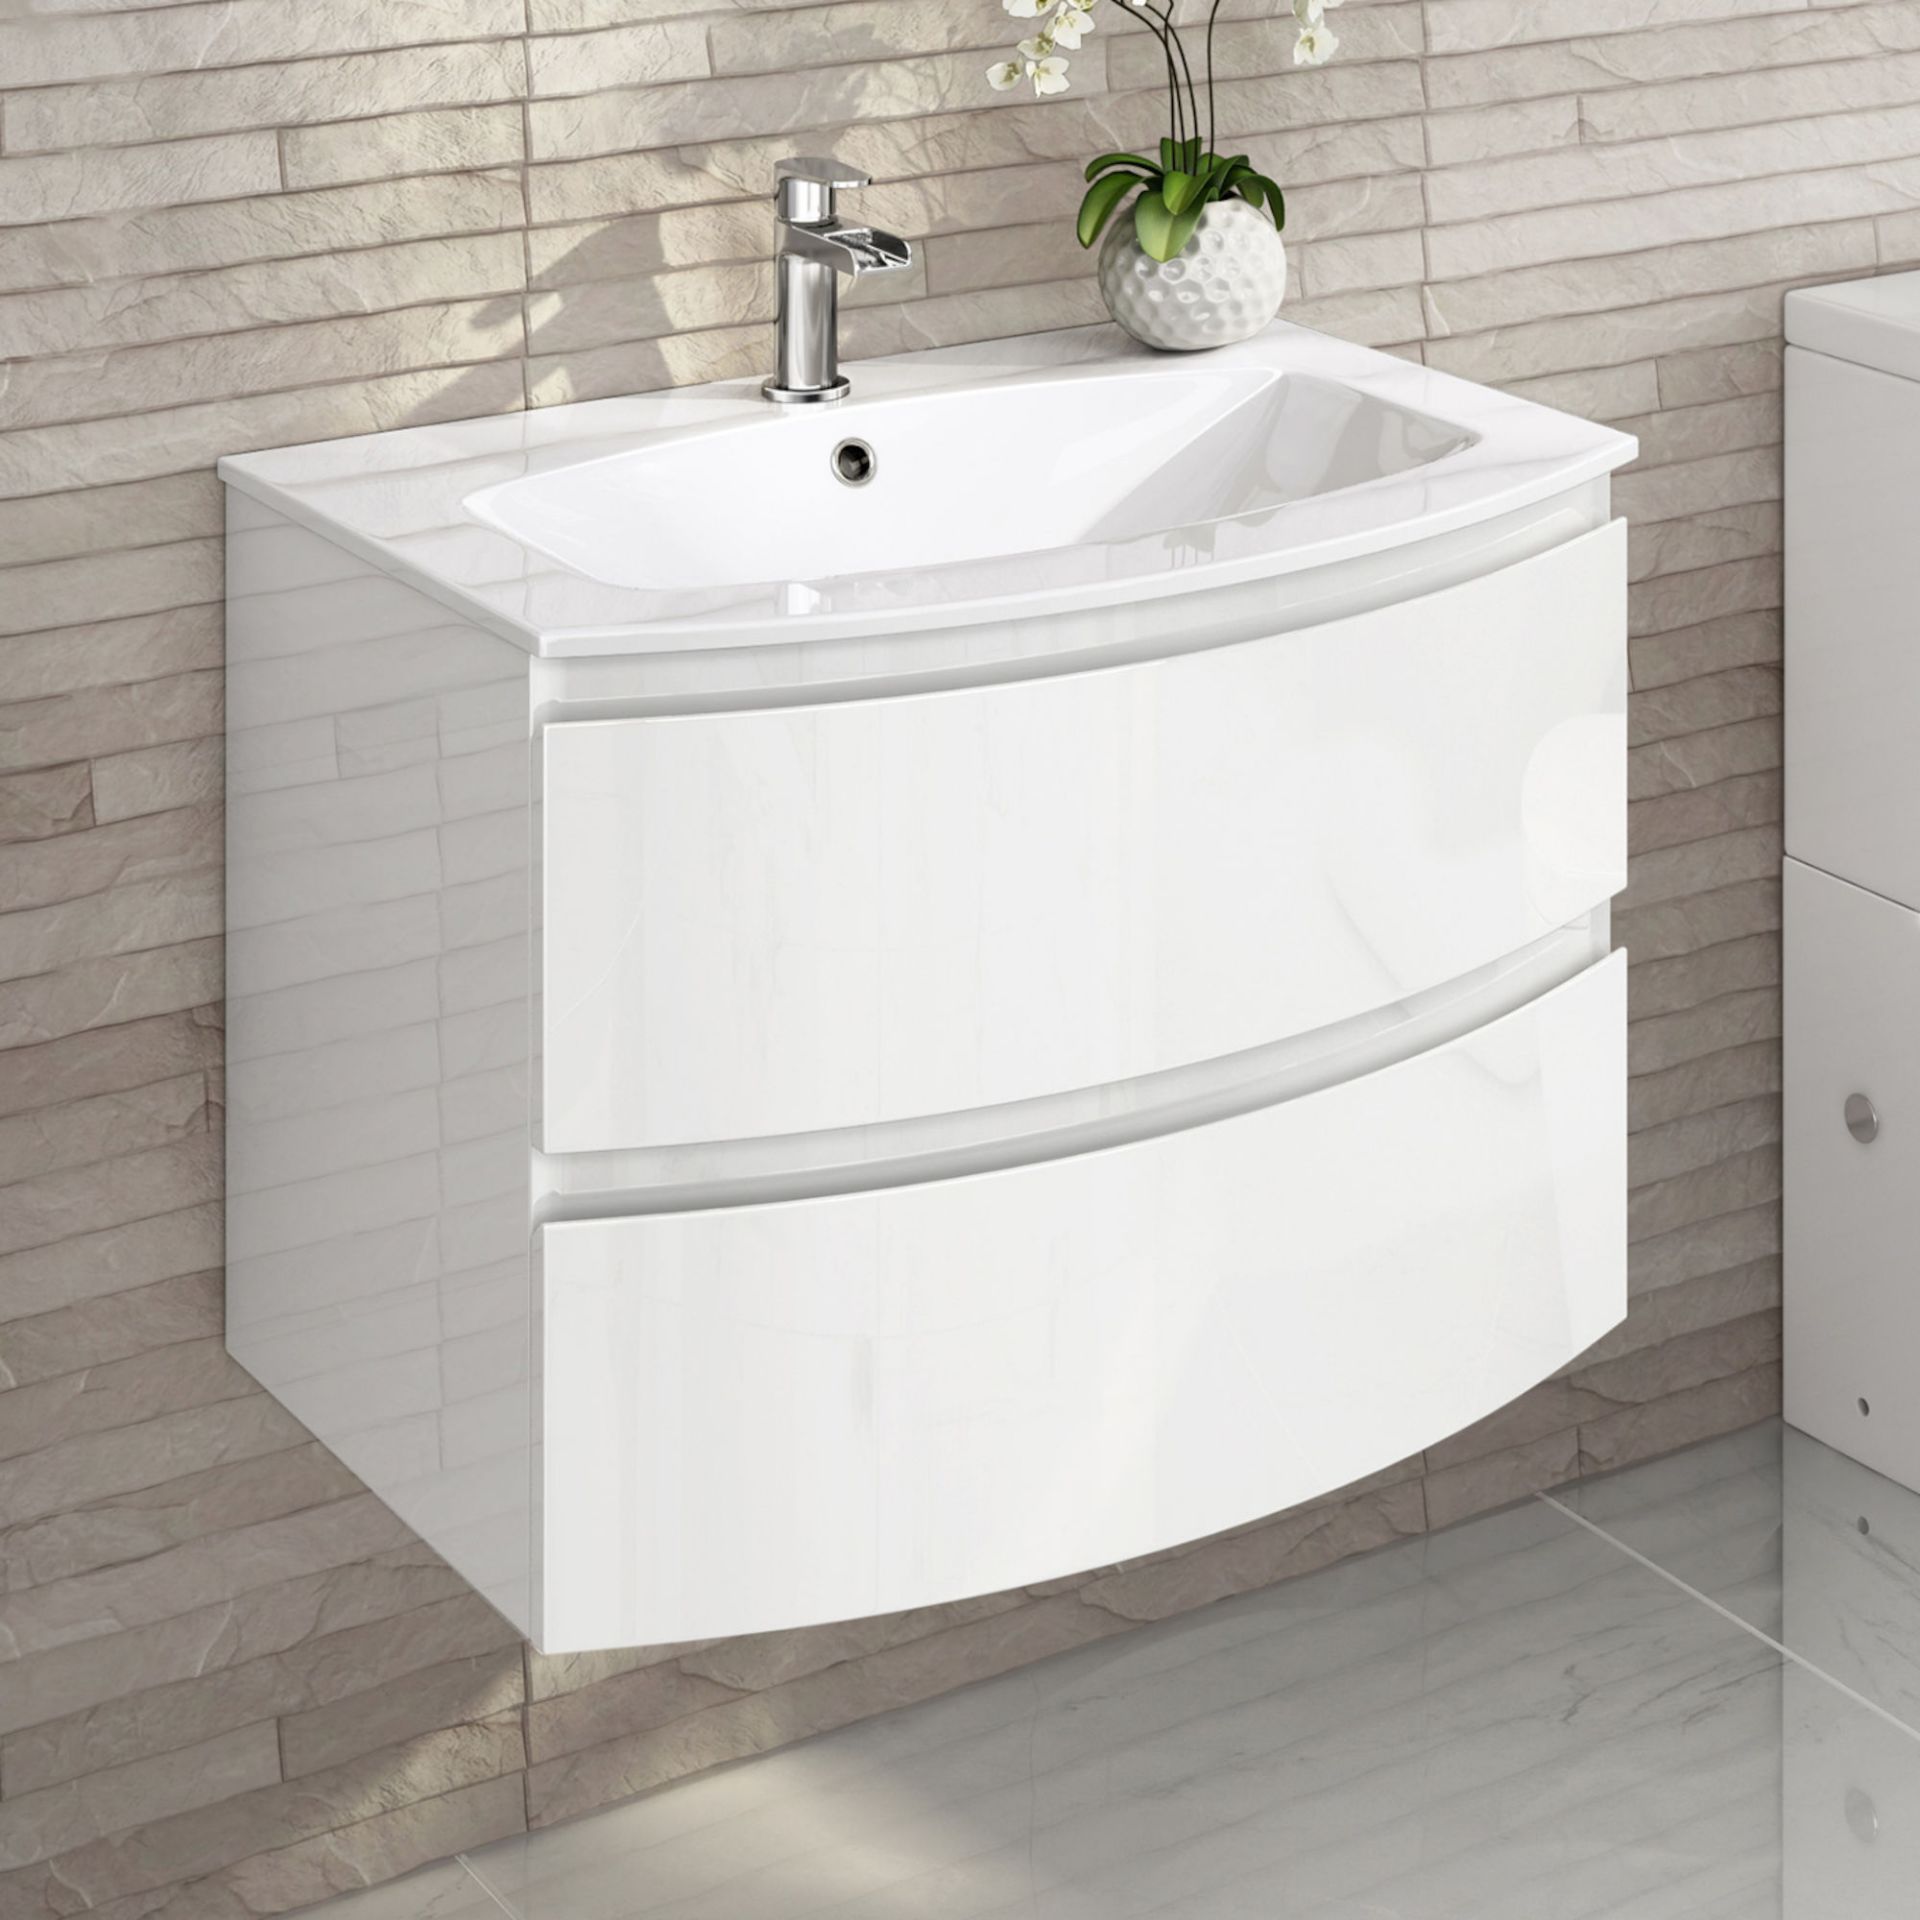 New 700mm Amelie High Gloss White Curved Vanity Unit - Wall Hung. Rrp £749.99.Comes Complete ... - Image 2 of 4